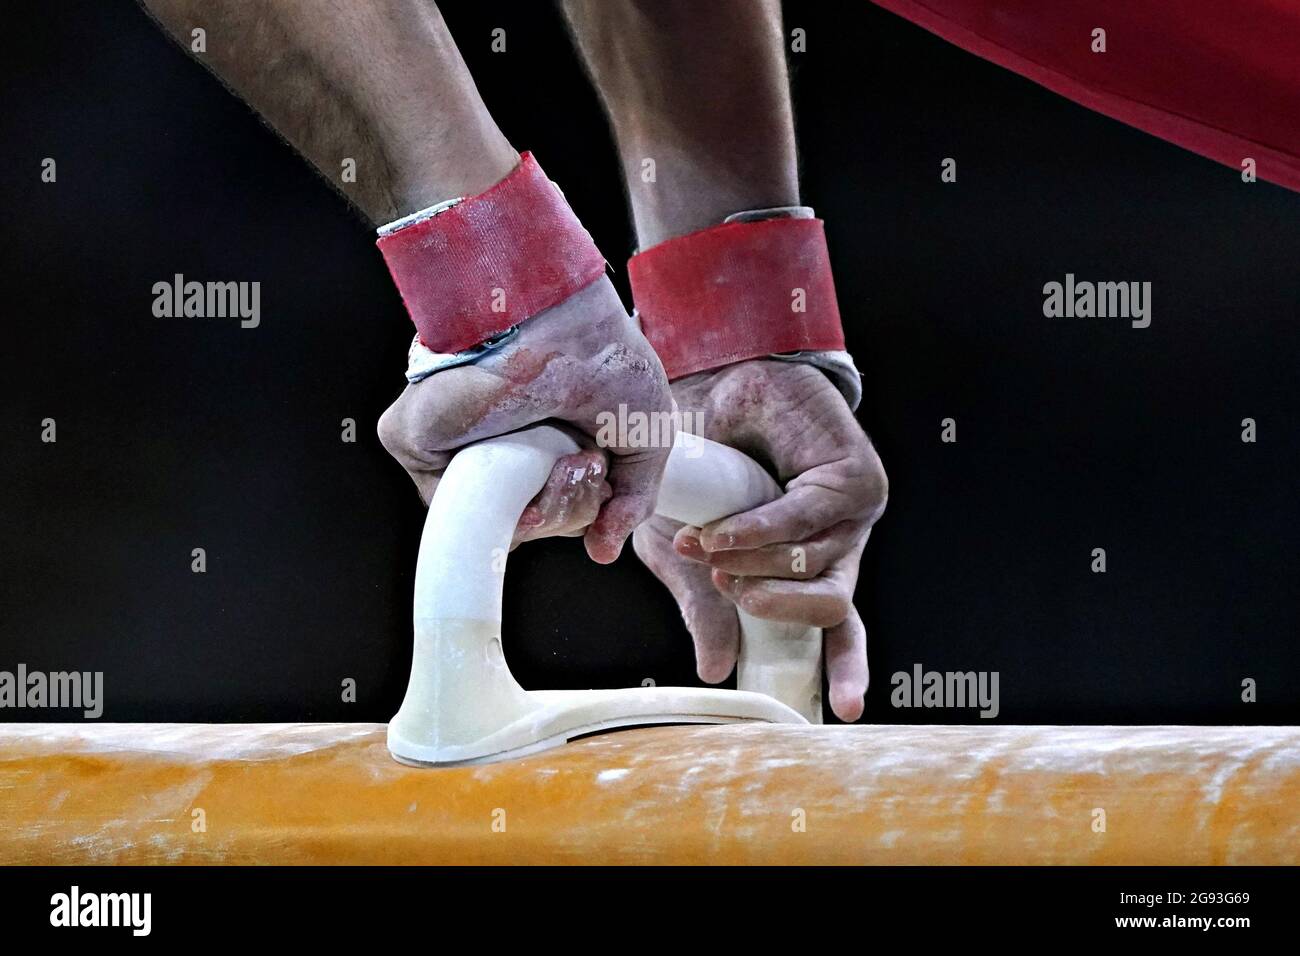 Tokyo, Japan. 24th July, 2021. Detail of the hands of Armenia's Artur Davtyan, during his routine on the pummel horse during Men's Gymnastics preliminary competition at Ariake Gymnastics Centre during the Tokyo Olympic Games in Tokyo, Japan, on Saturday, July 24, 2021. Photo by Richard Ellis/UPI. Credit: UPI/Alamy Live News Stock Photo